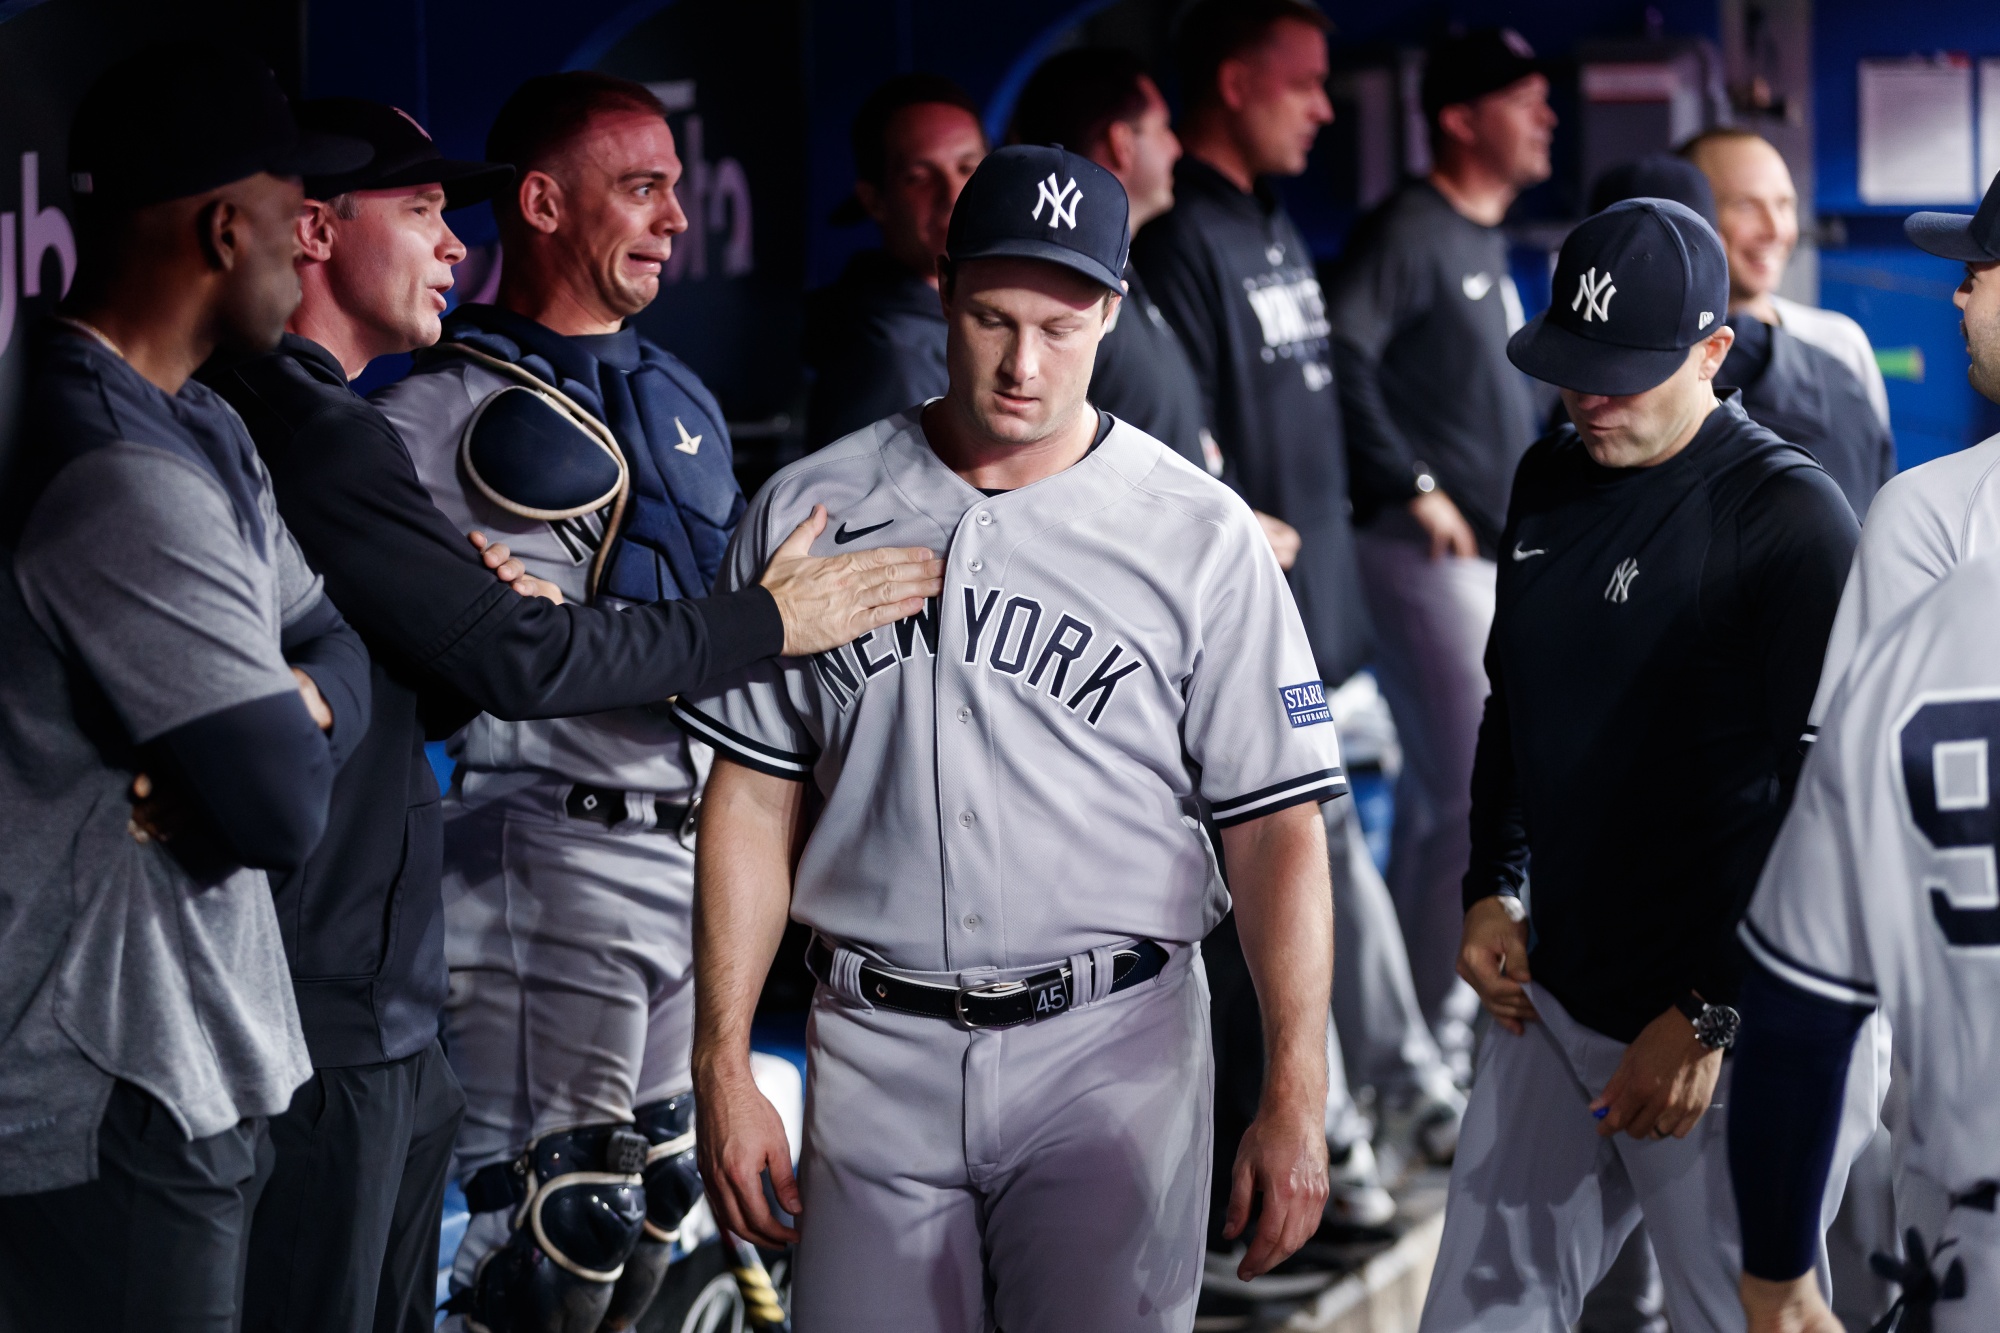 ESPN REPORT: Yankees player is been suspended from all sports for placing a bet against…